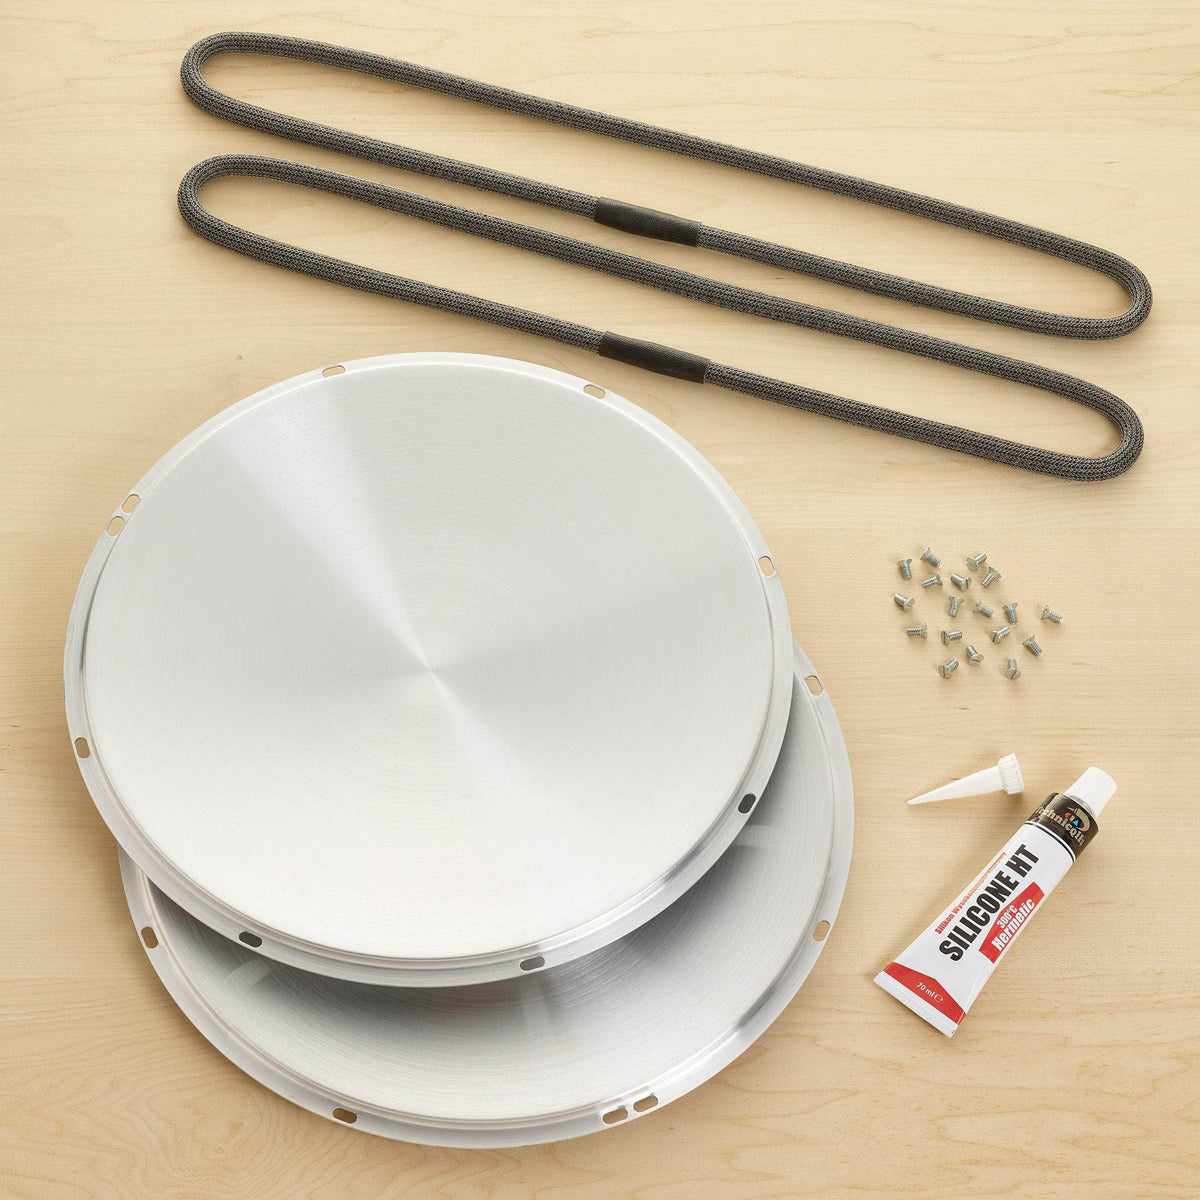 Aluminium Lid liners replacement kit for use with Aga range cooker